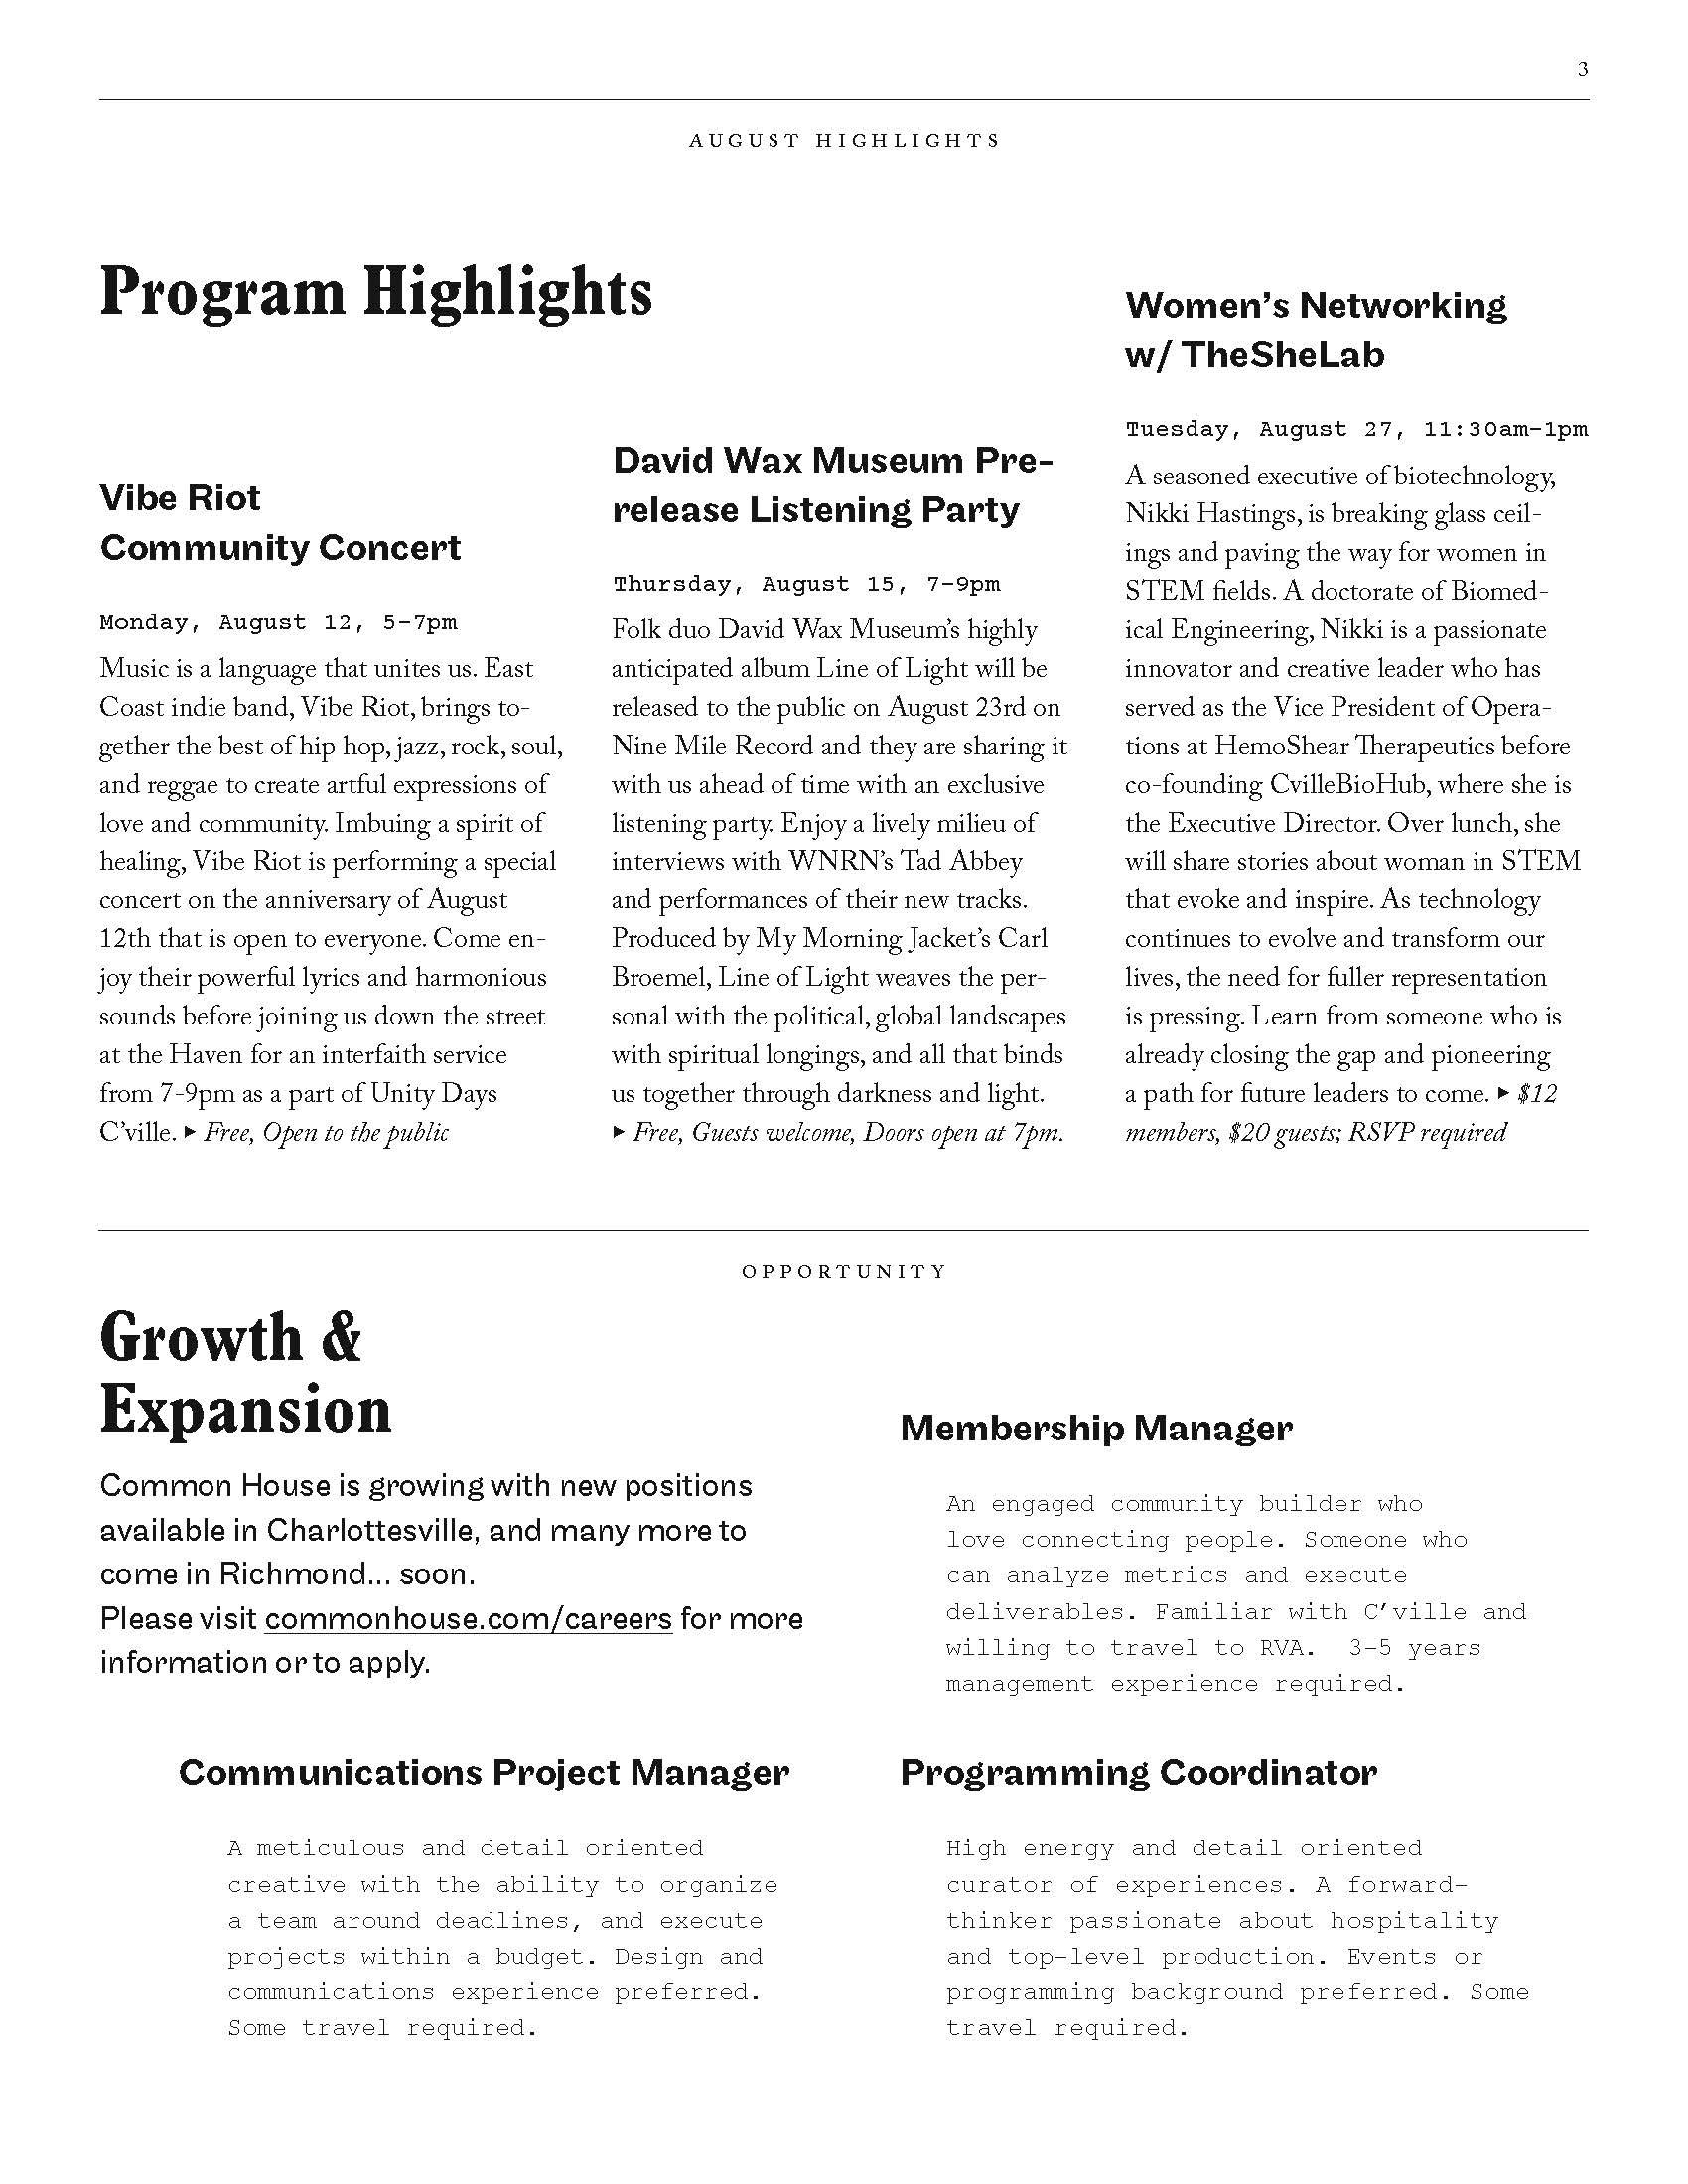 9 Common-House-newsletter-19-08-press2_Page_05.jpg